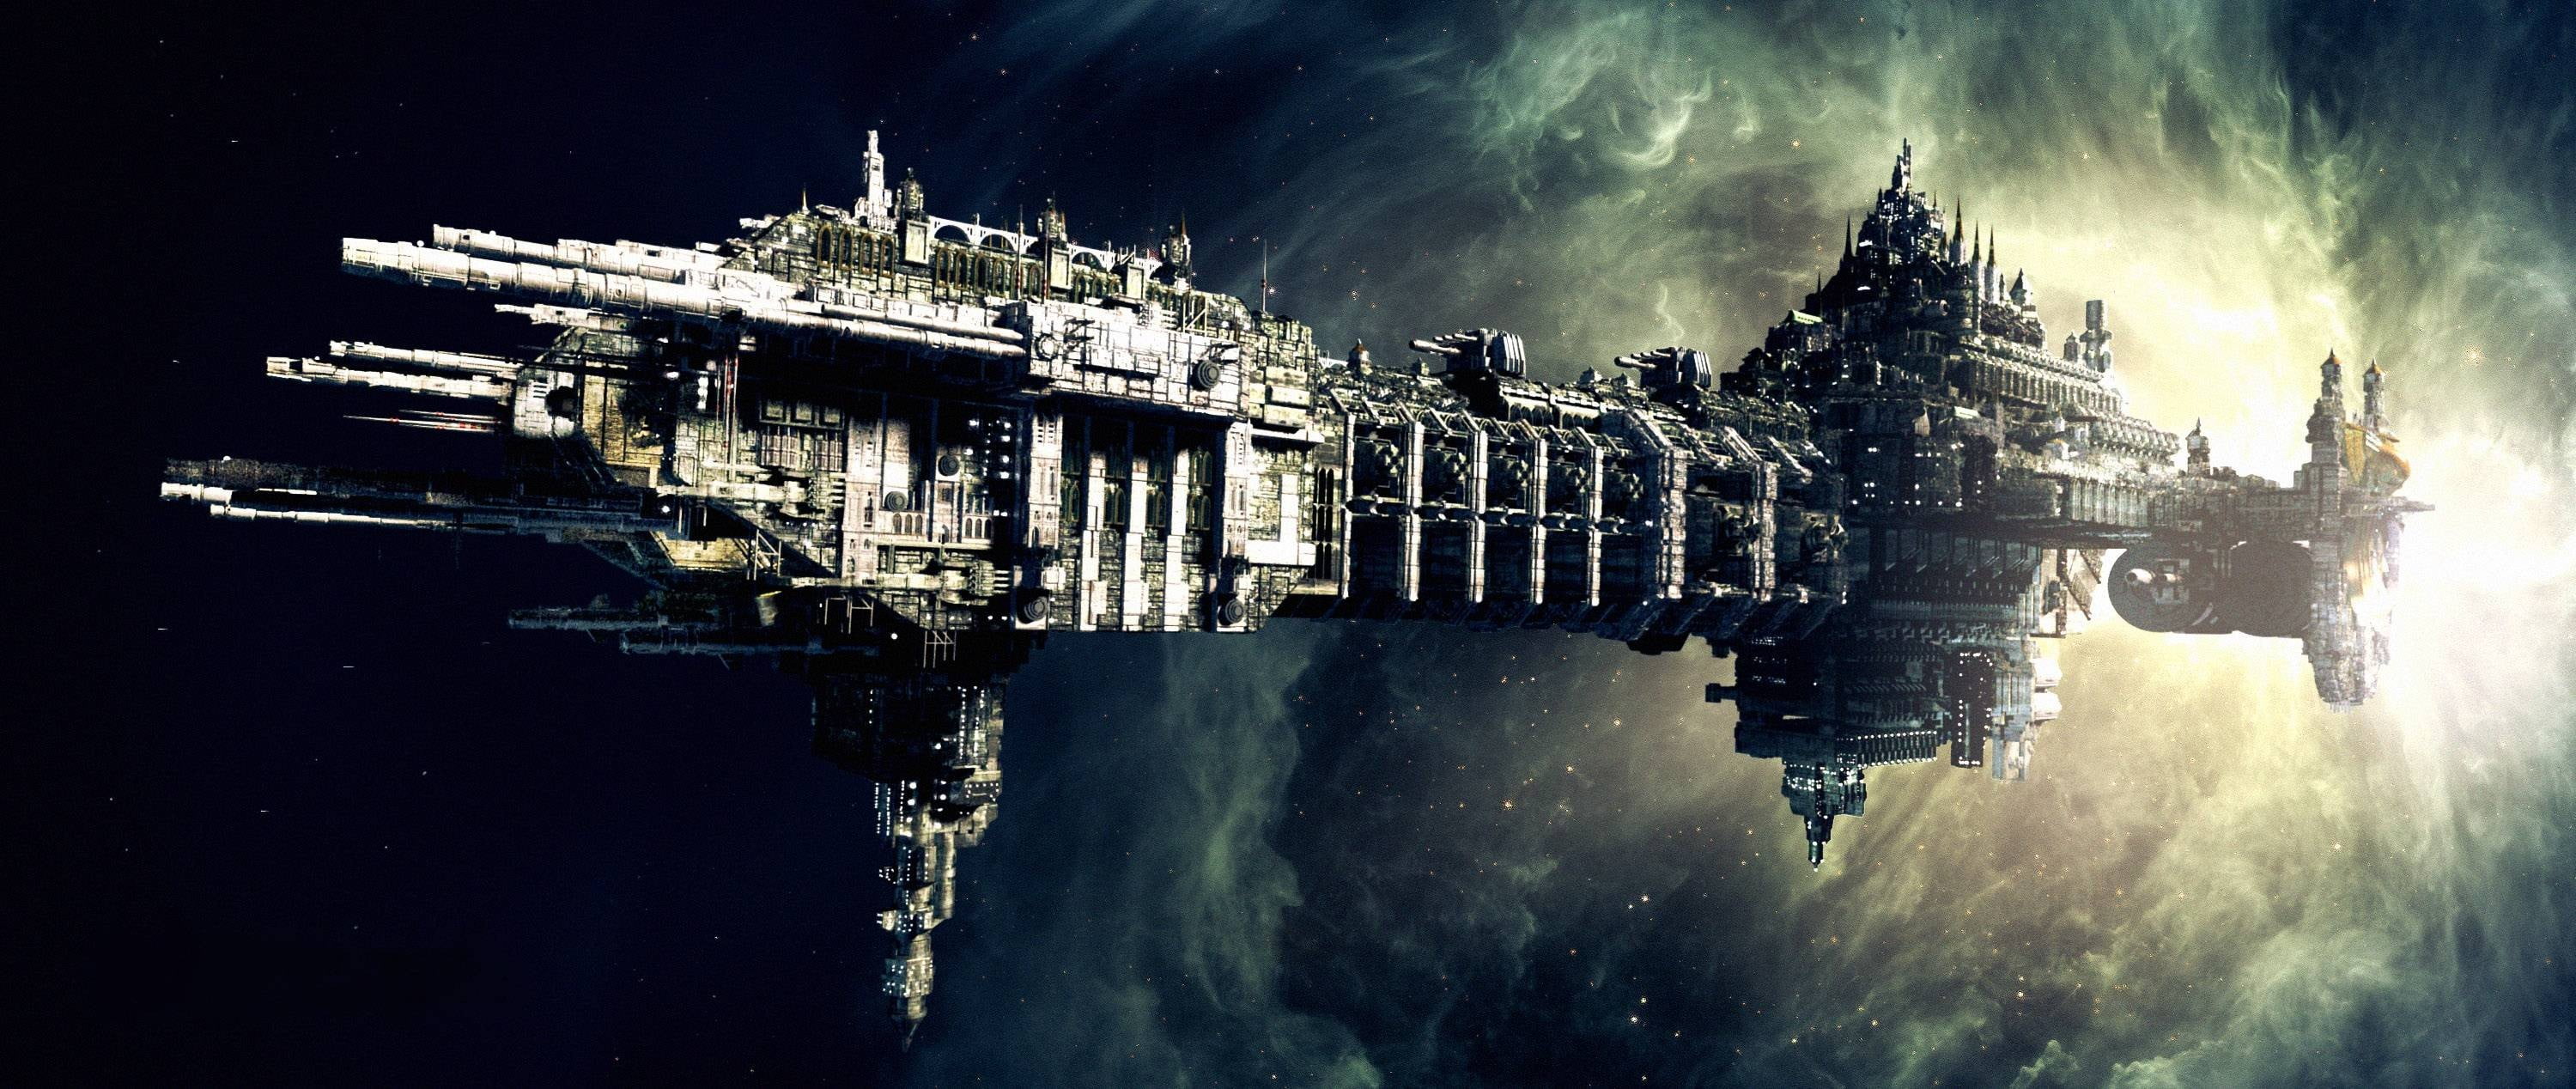 gray space ship, space, science fiction, spaceship, Warhammer 40,000